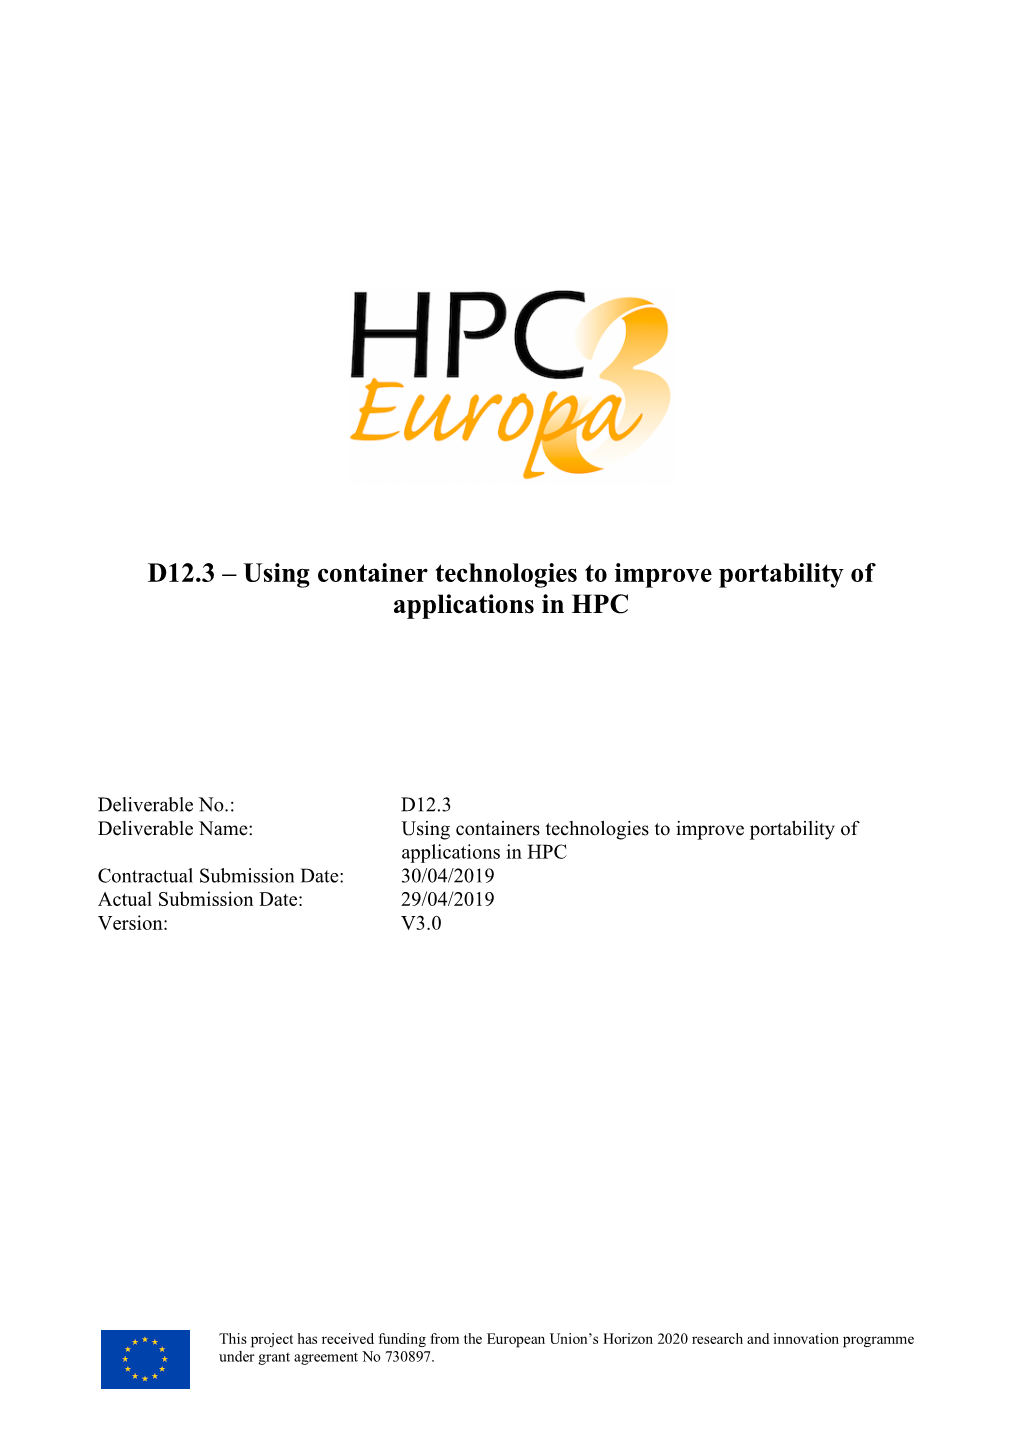 D12.3 – Using Container Technologies to Improve Portability of Applications in HPC